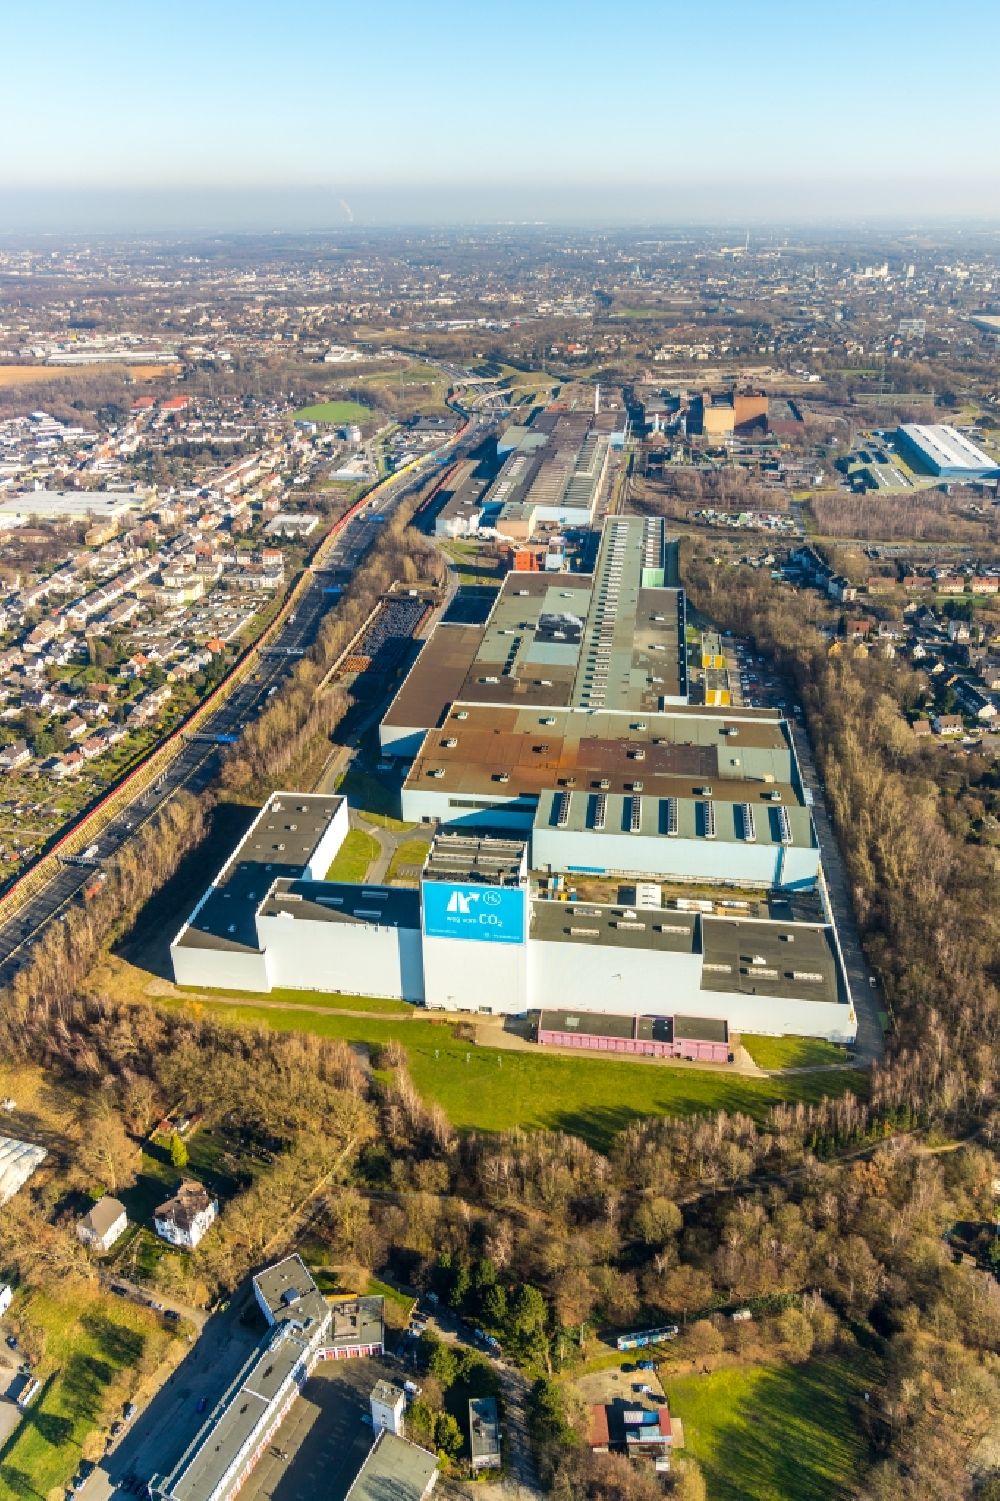 Bochum from above - Technical equipment and production facilities of the steelworks of thyssenkrupp Steel Europe AG along the Essener Str. in the district Wattenscheid in Bochum in the state North Rhine-Westphalia, Germany